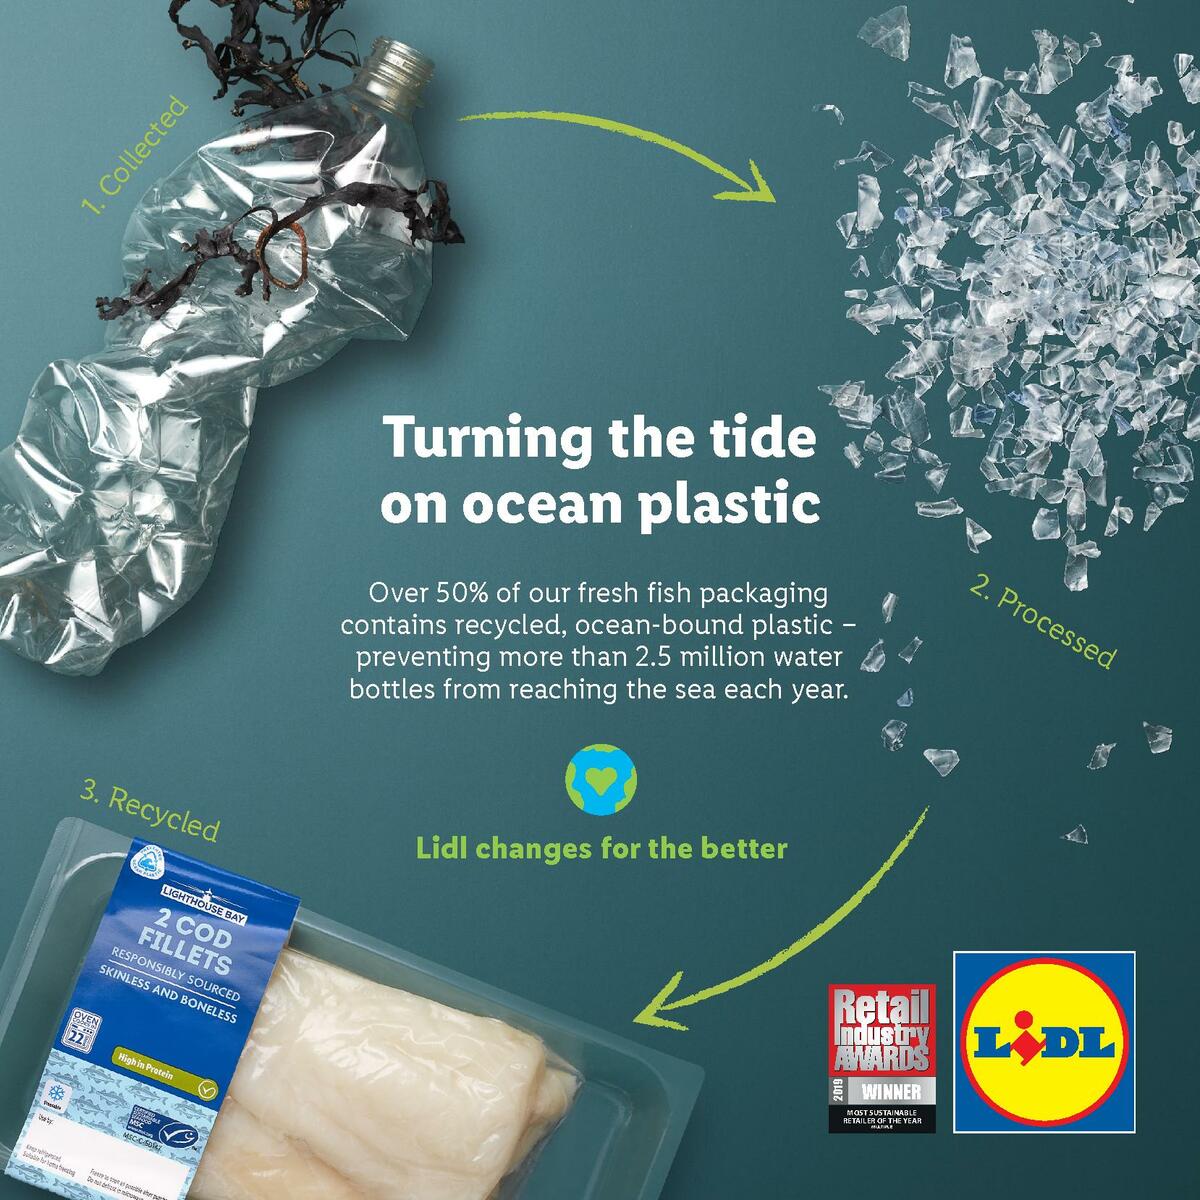 LIDL July Magazine Offers from 1 July